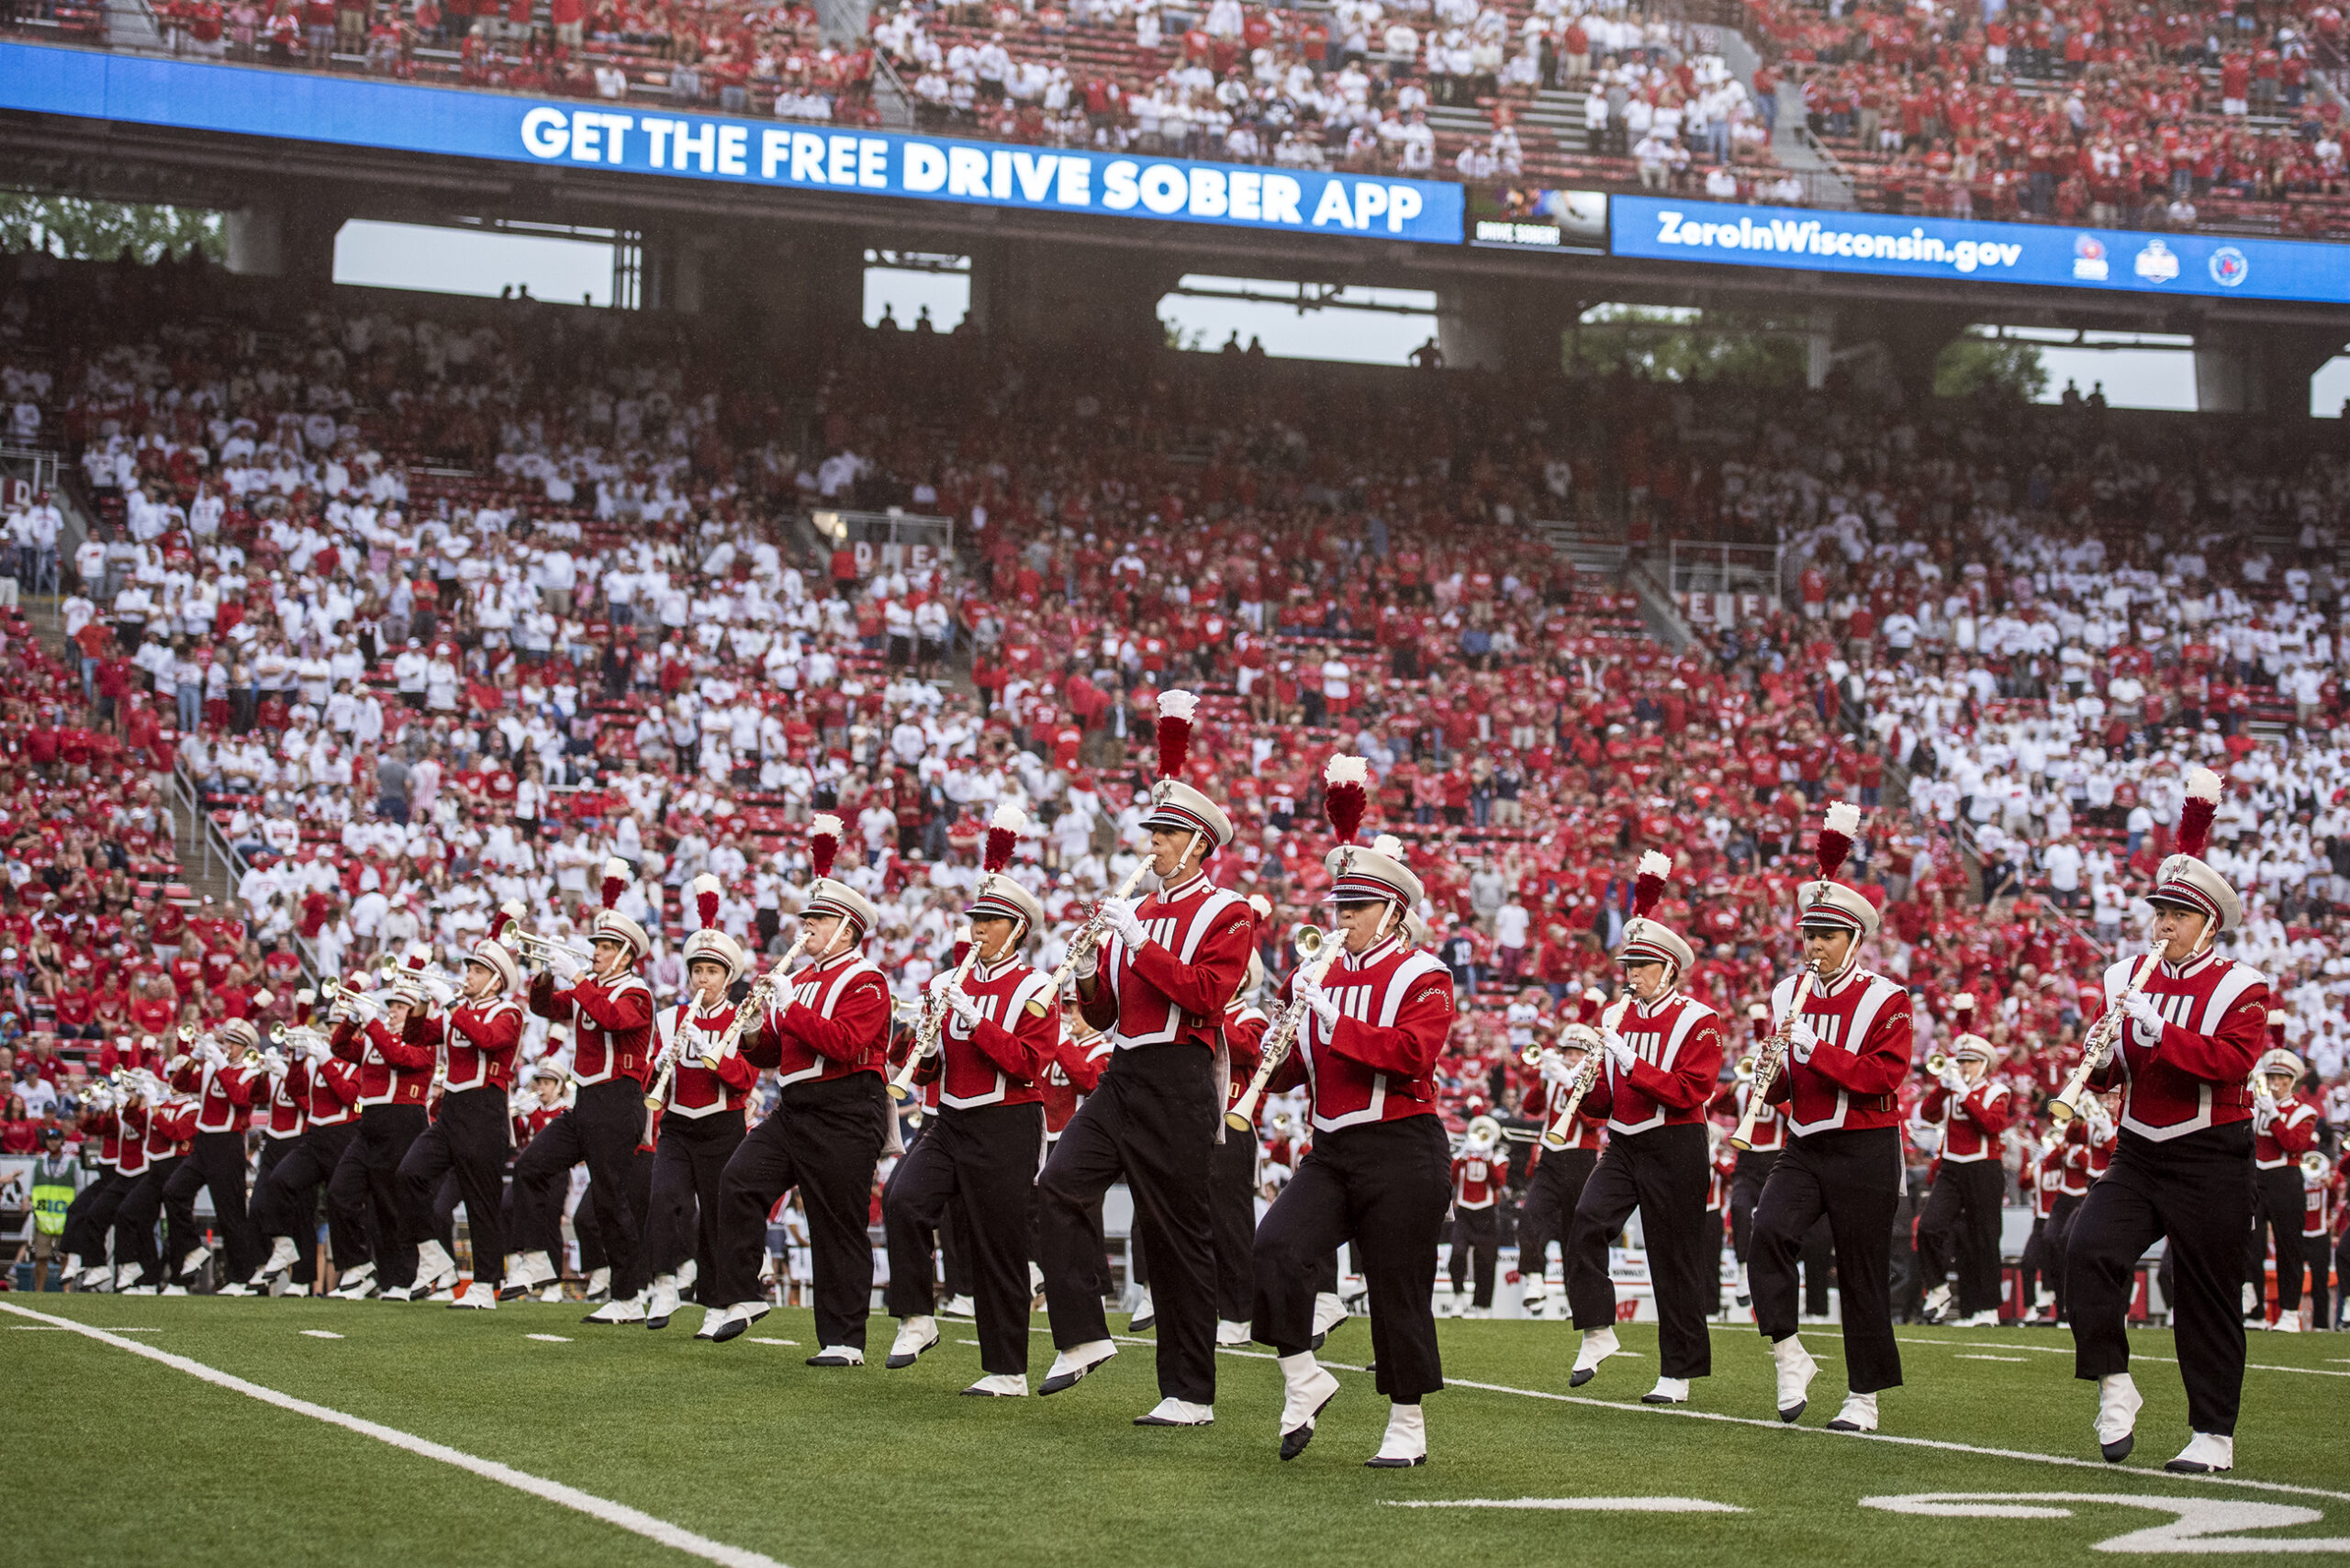 Members of the marching band perform in front of a crowded stadium.